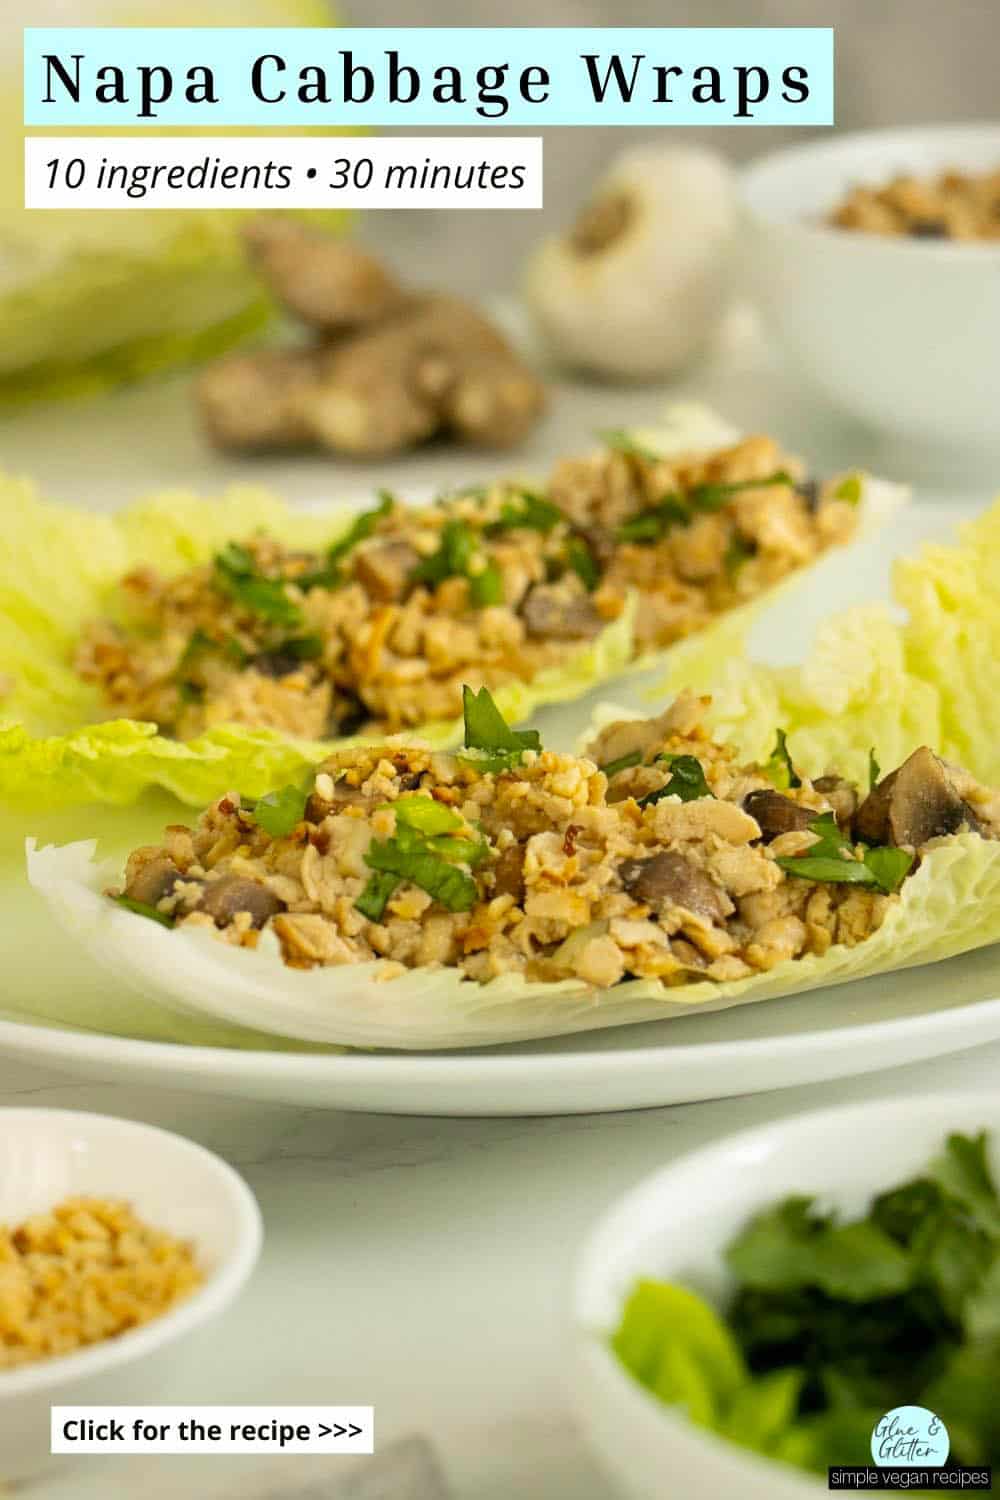 napa cabbage wraps on a white plate surrounded by toppings in bowls, text overlay